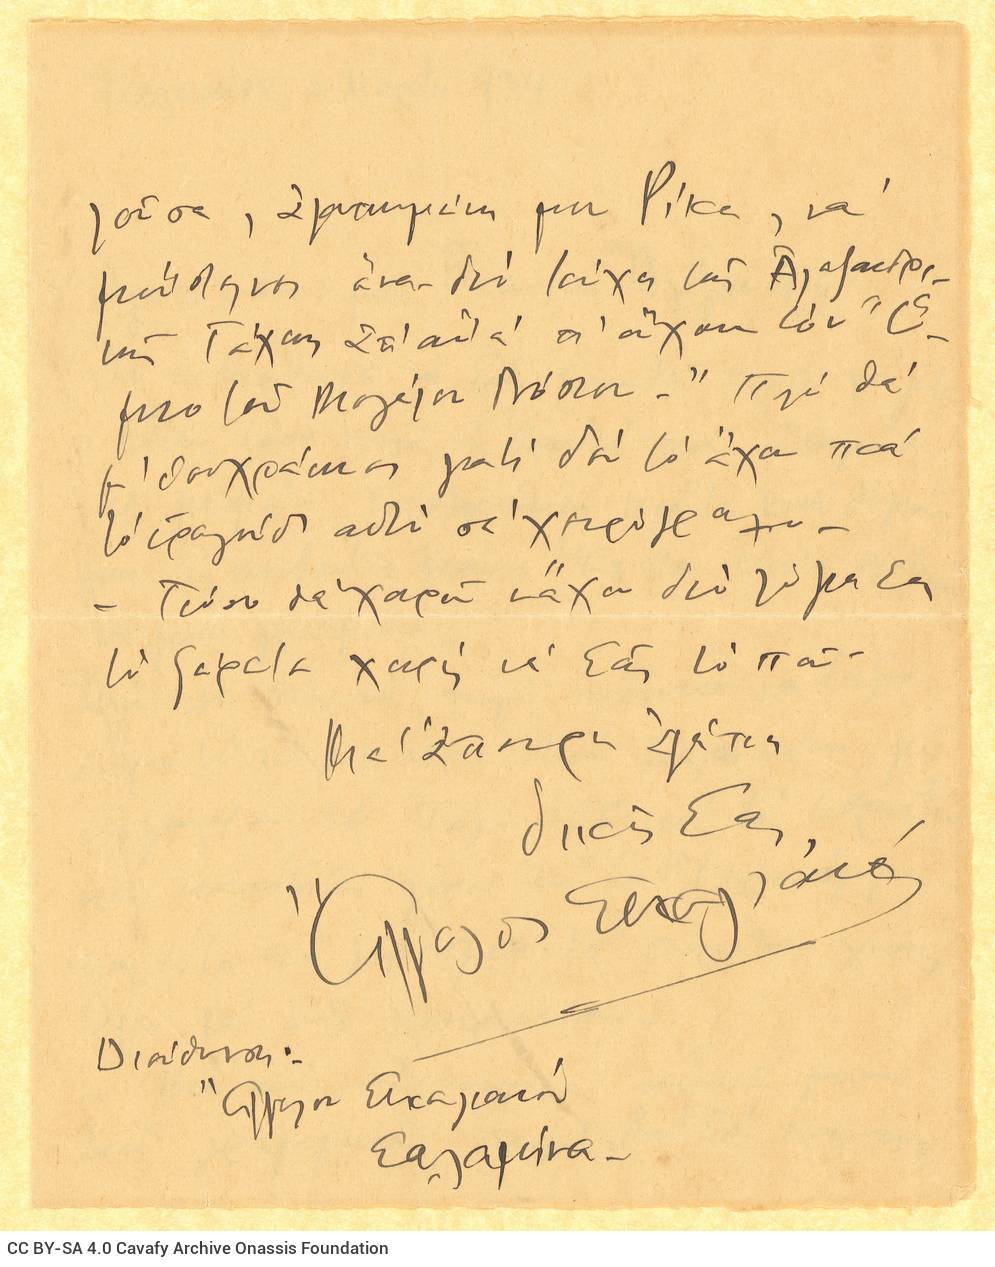 Handwritten letter by Angelos Sikelianos to the Singopoulos on the first and third pages of a bifolio. The remaining pages ar